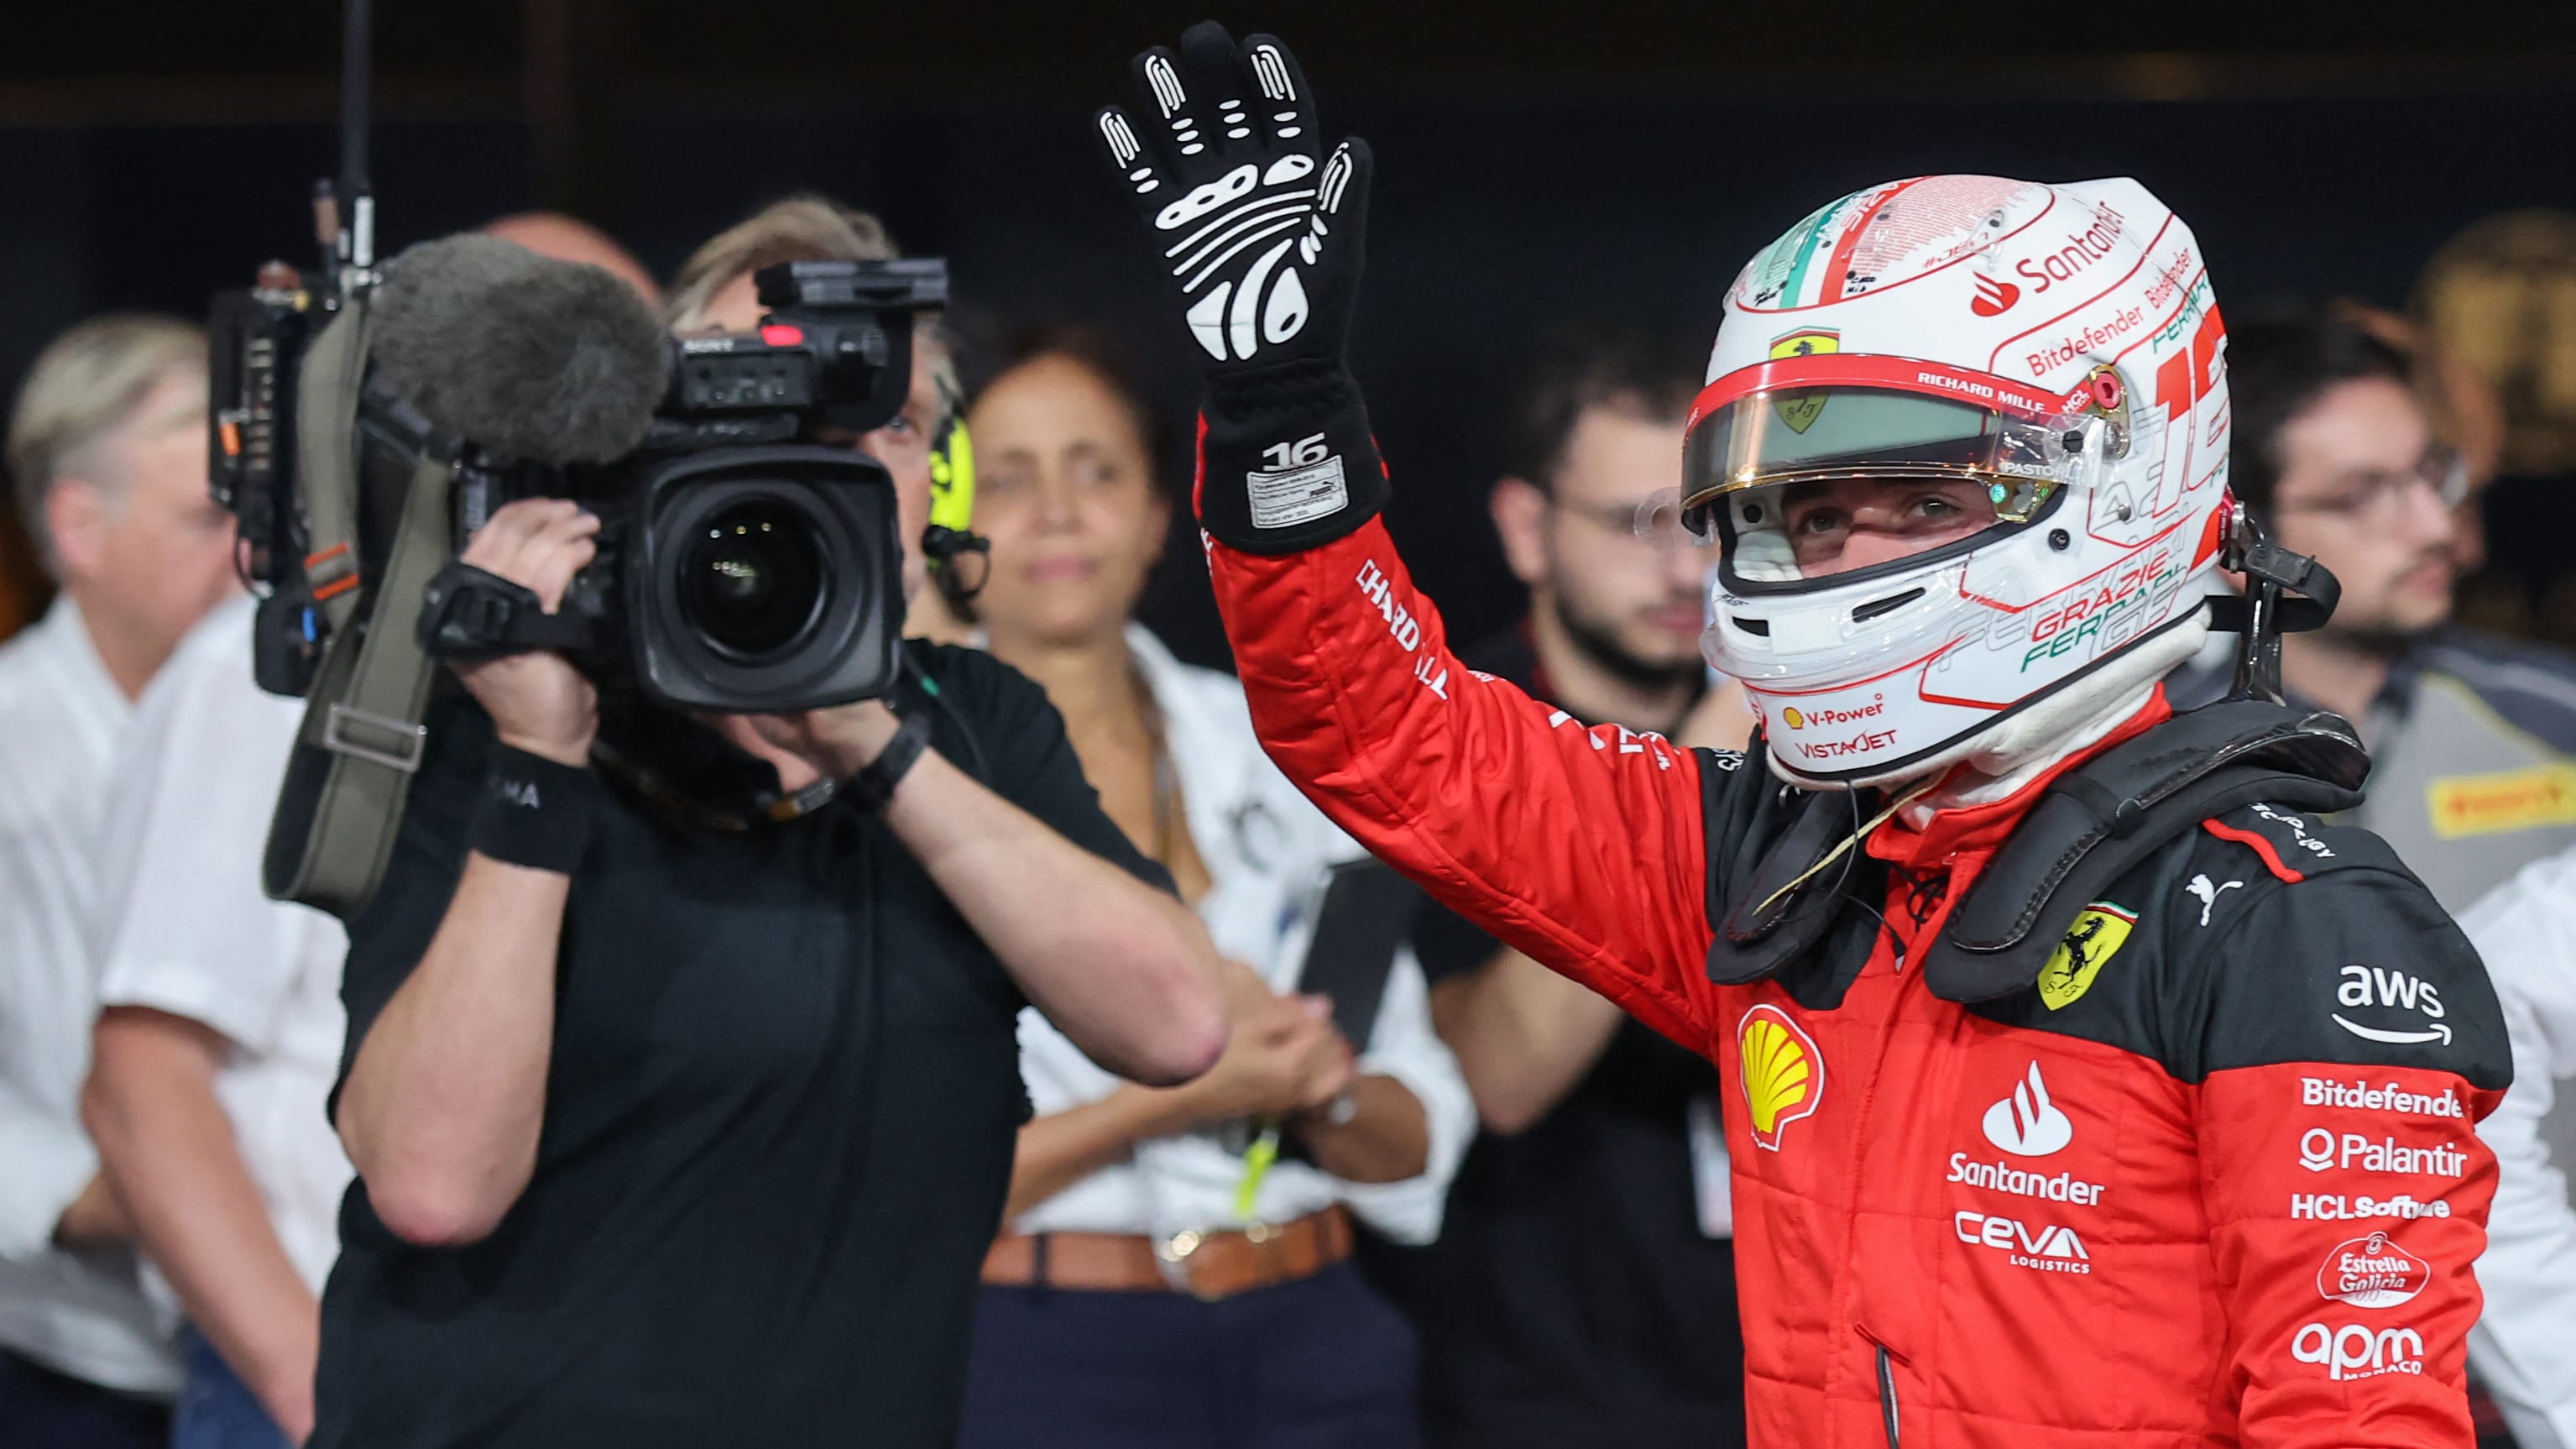 Ferrari's Monegasque driver Charles Leclerc greets the fans after finishing with the second best